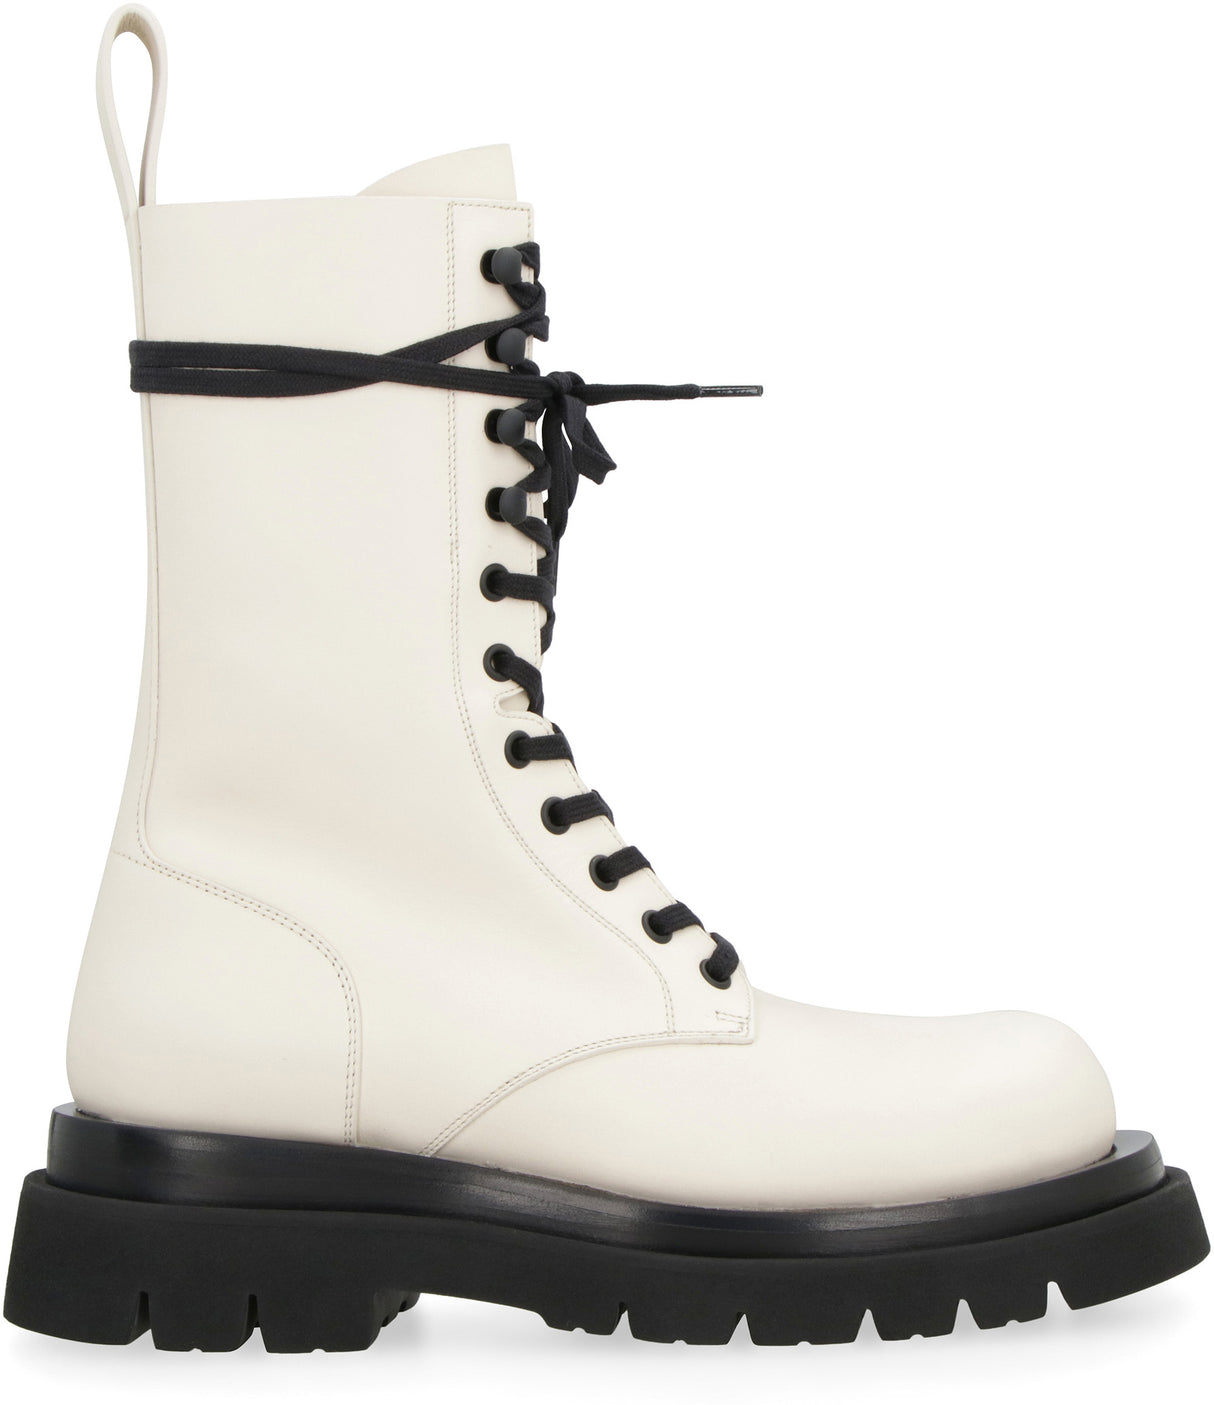 BOTTEGA VENETA Lace-Up Ankle Boots for Women - White Leather with Contrasting Details